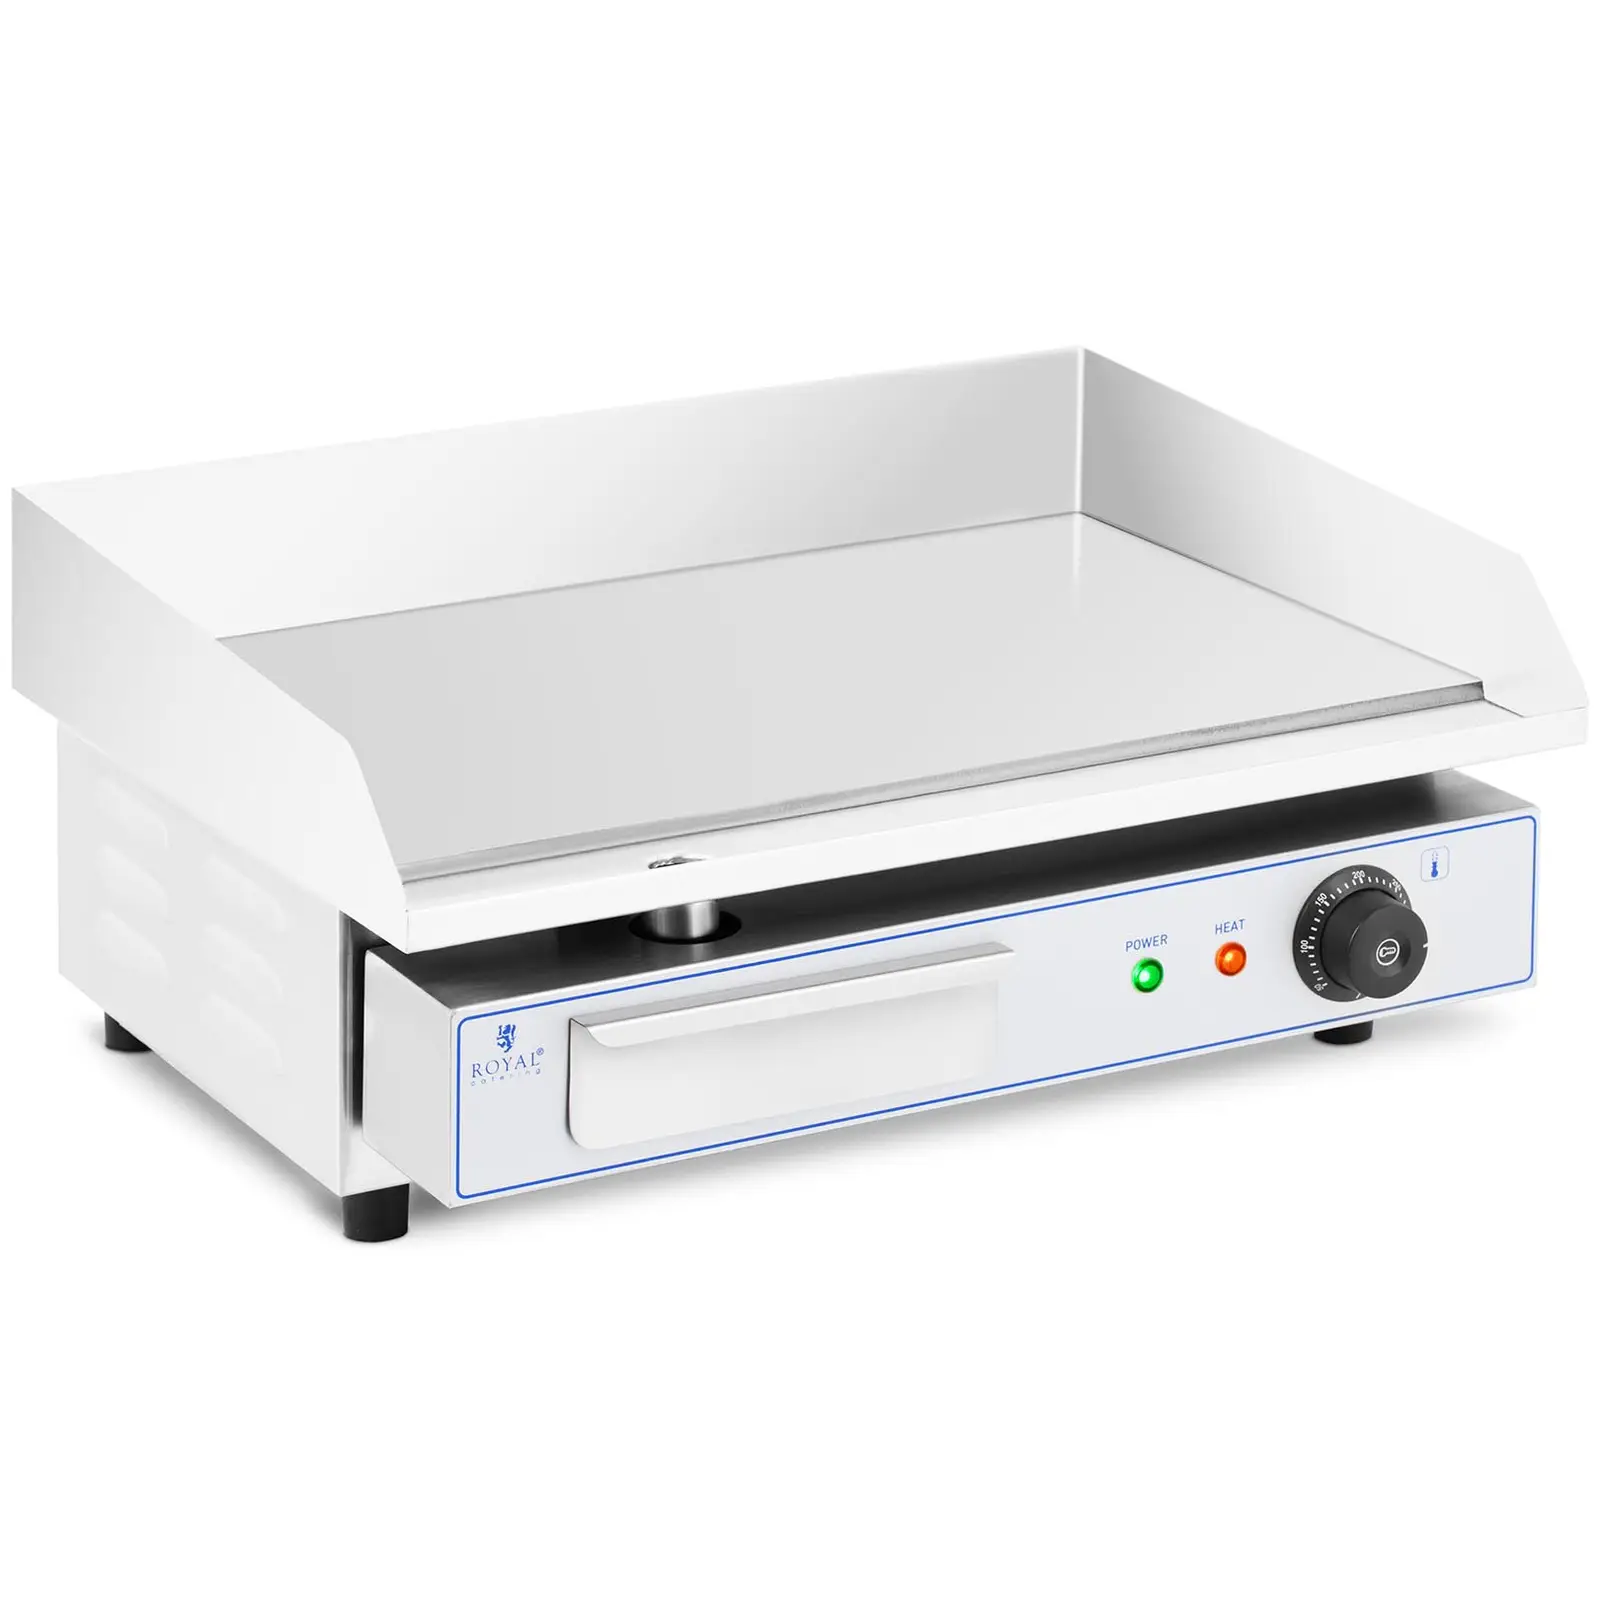 Fry top elettrico - Piastra liscia in acciaio inox - 550 x 400 mm - Royal Catering - Flat - 3,000 W